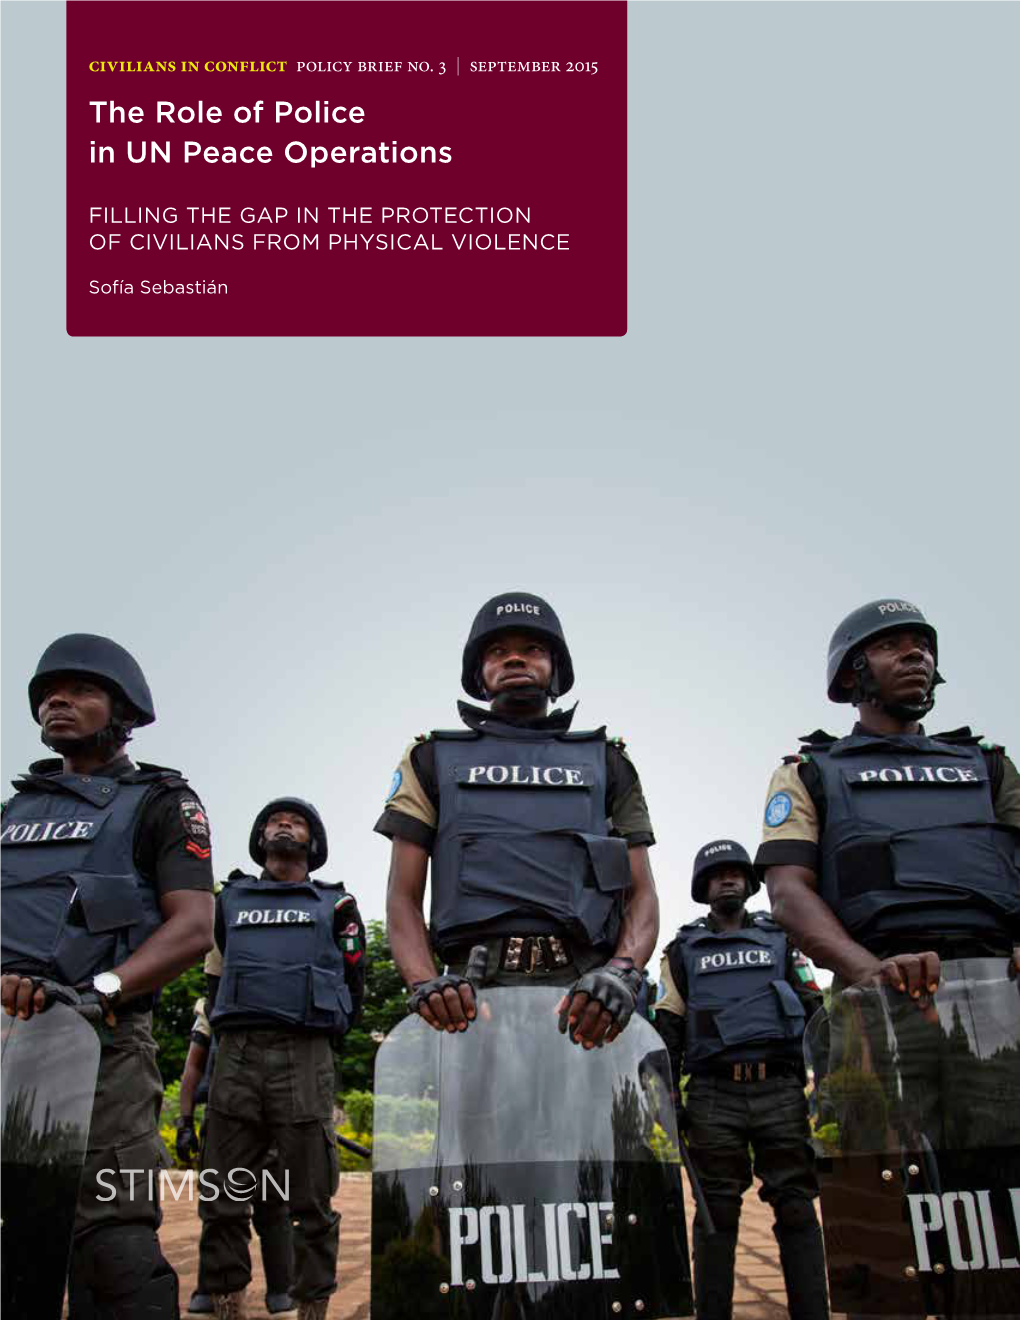 The Role of Police in UN Peace Operations